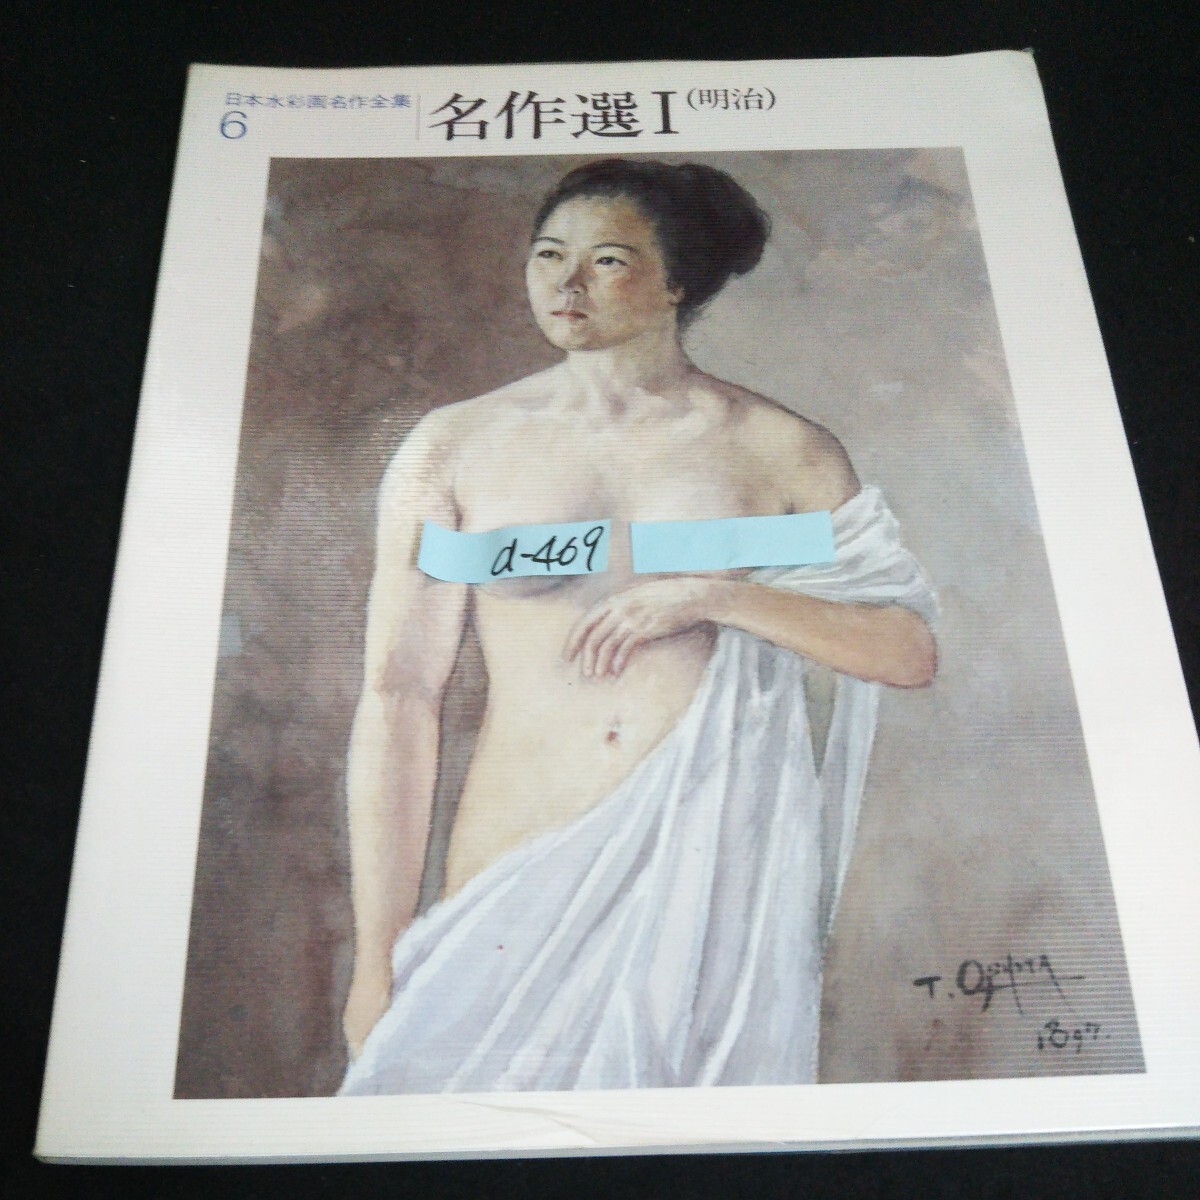 d-469 Japanese Watercolor Paintings ※14 Masterpieces Complete Collection ⑥ Masterpiece Selection I (Meiji) Publisher/Shigeya Tanaka Second Edition published in 1982, Painting, Art Book, Collection, Art Book